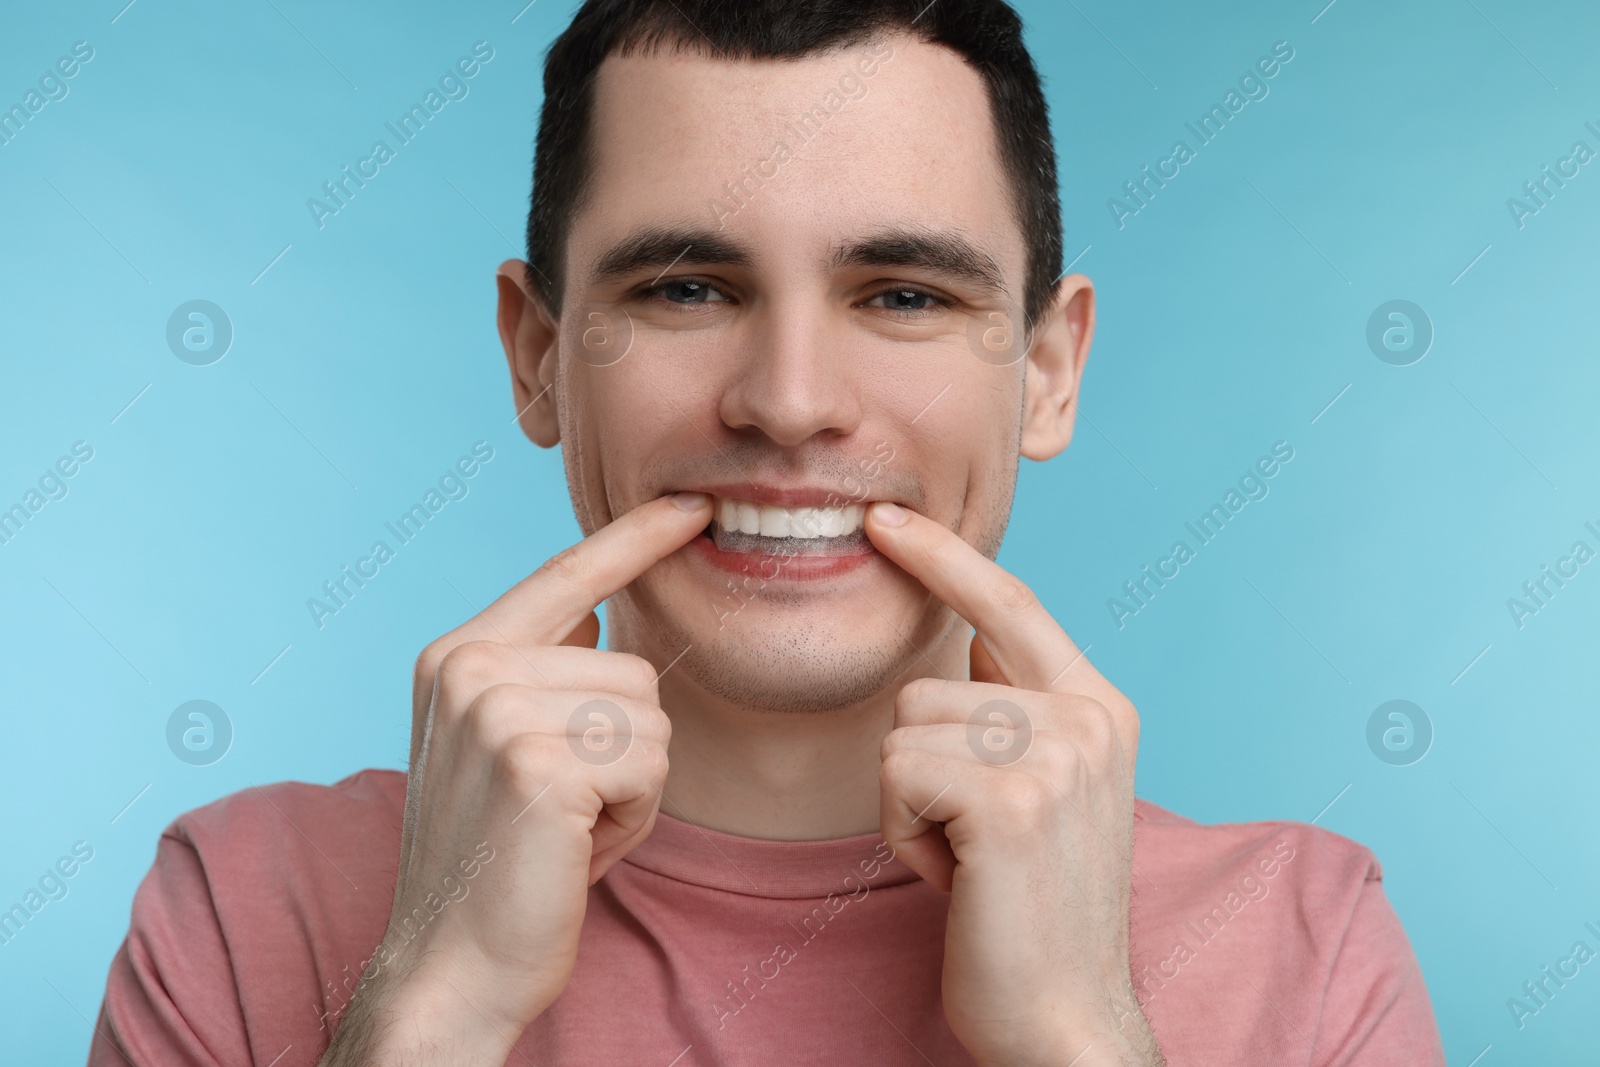 Photo of Young man applying whitening strip on his teeth against light blue background